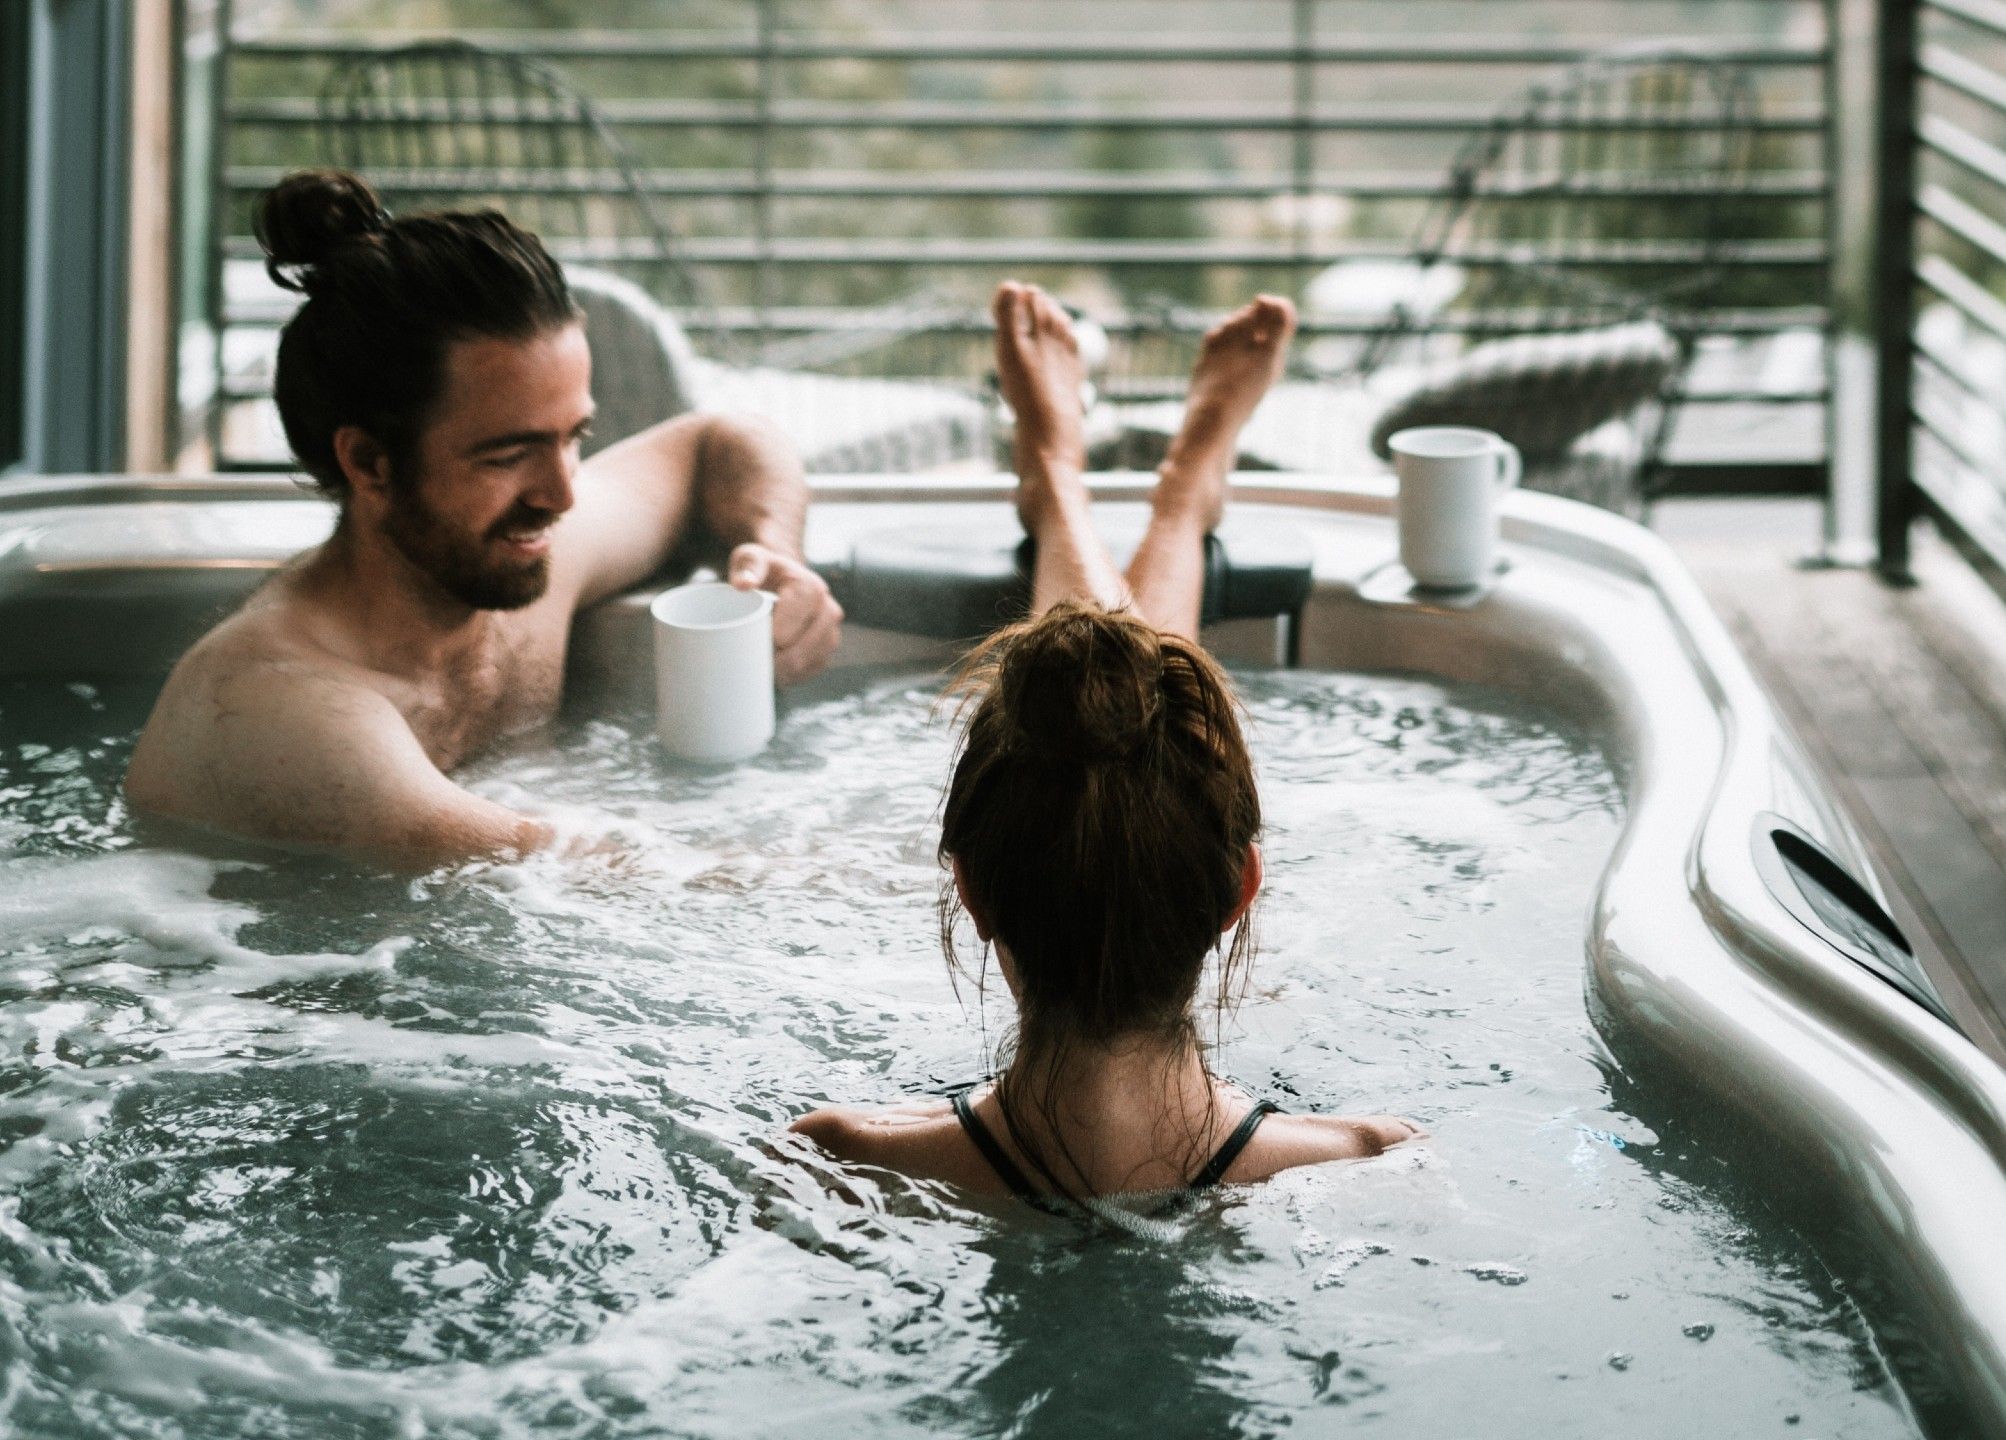 Hot tubs can be soothing, but they can also breed bacteria if imporperly sanitized.